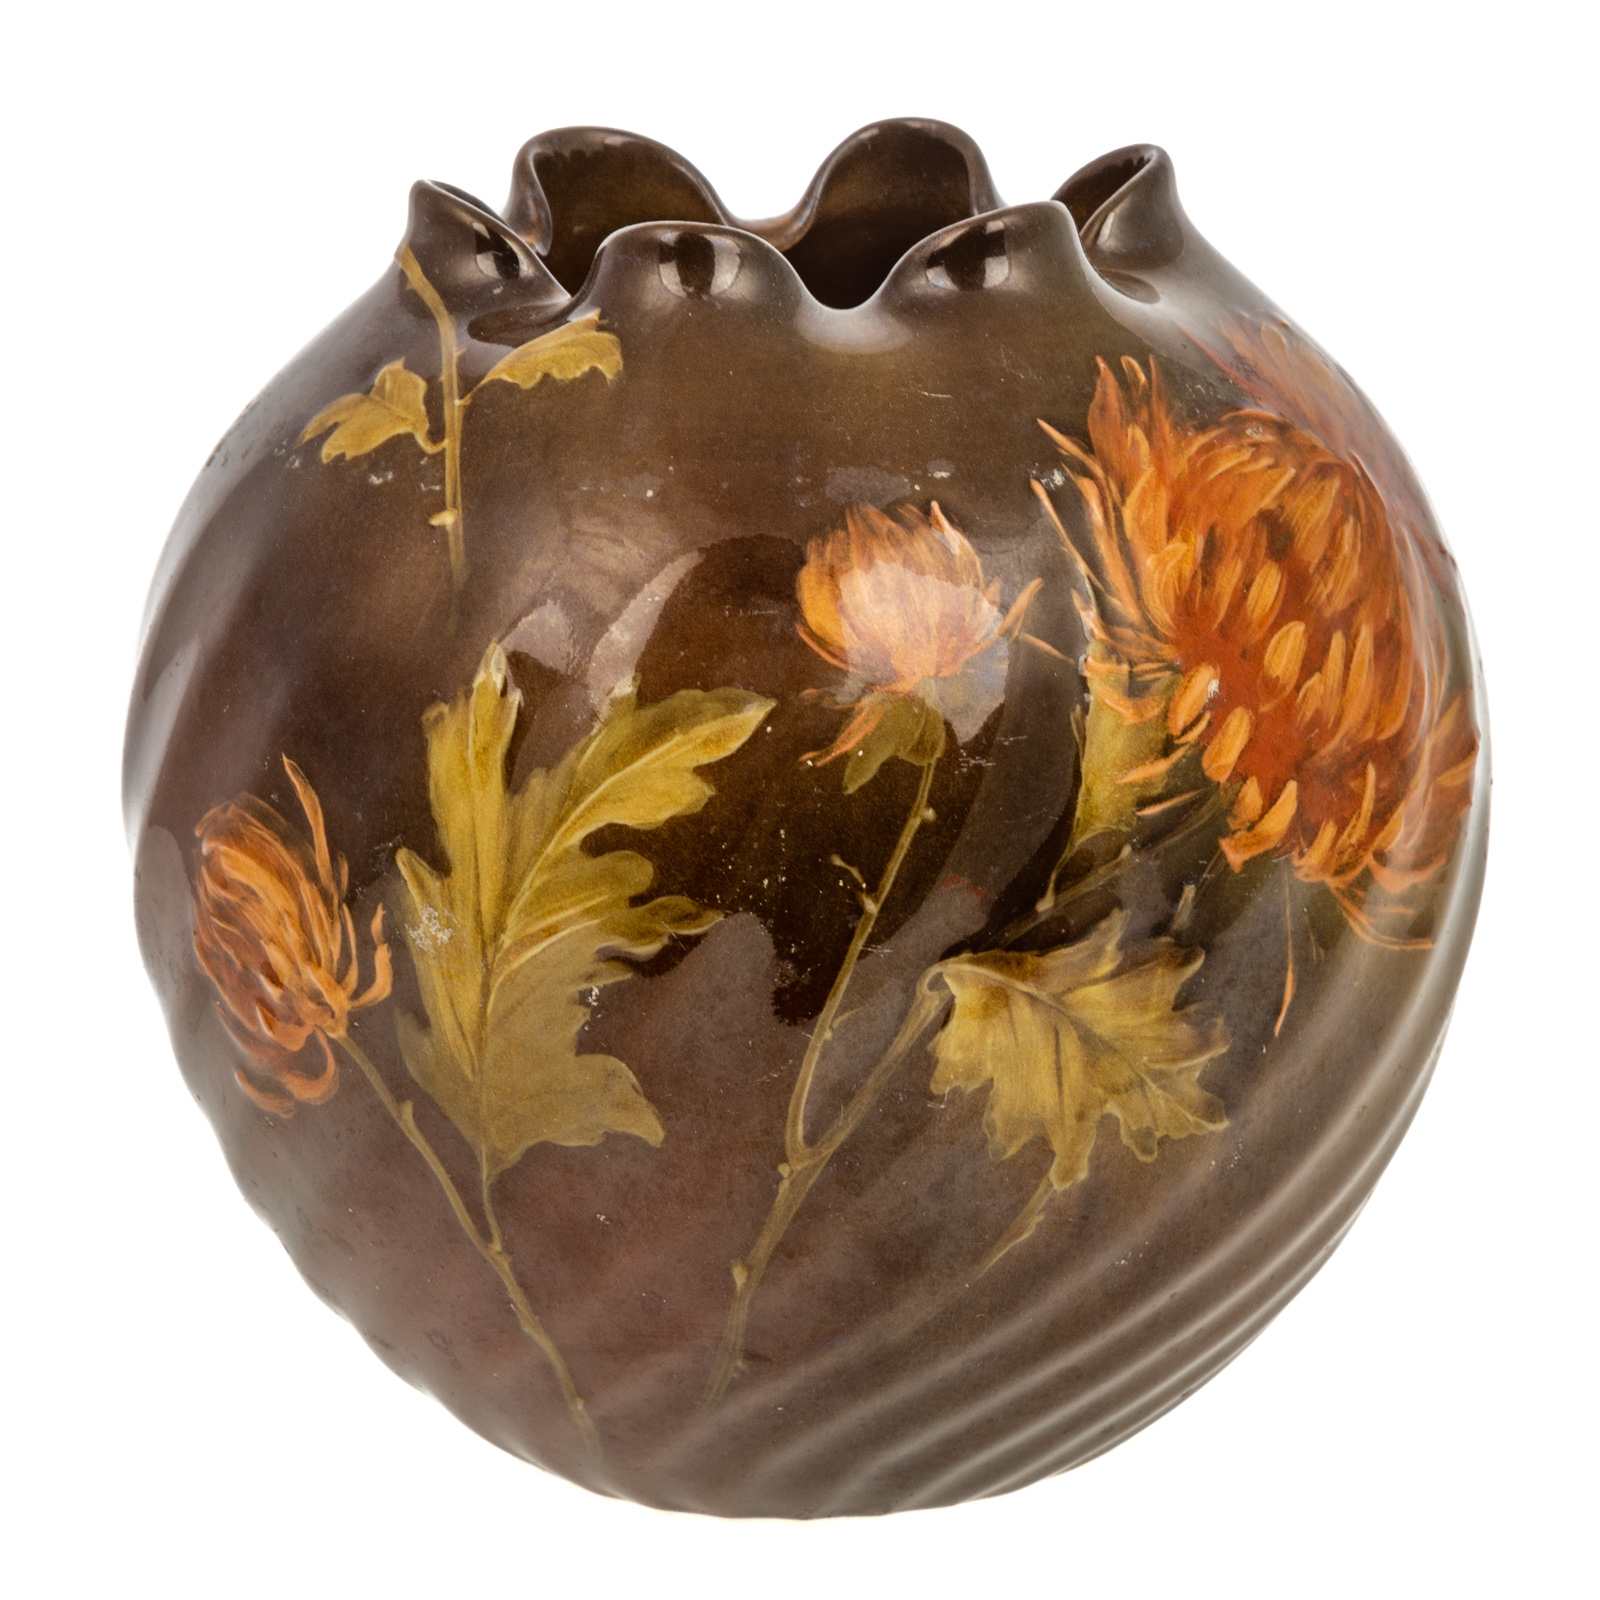 ROOKWOOD ART POTTERY VASE, BY WILLIAM